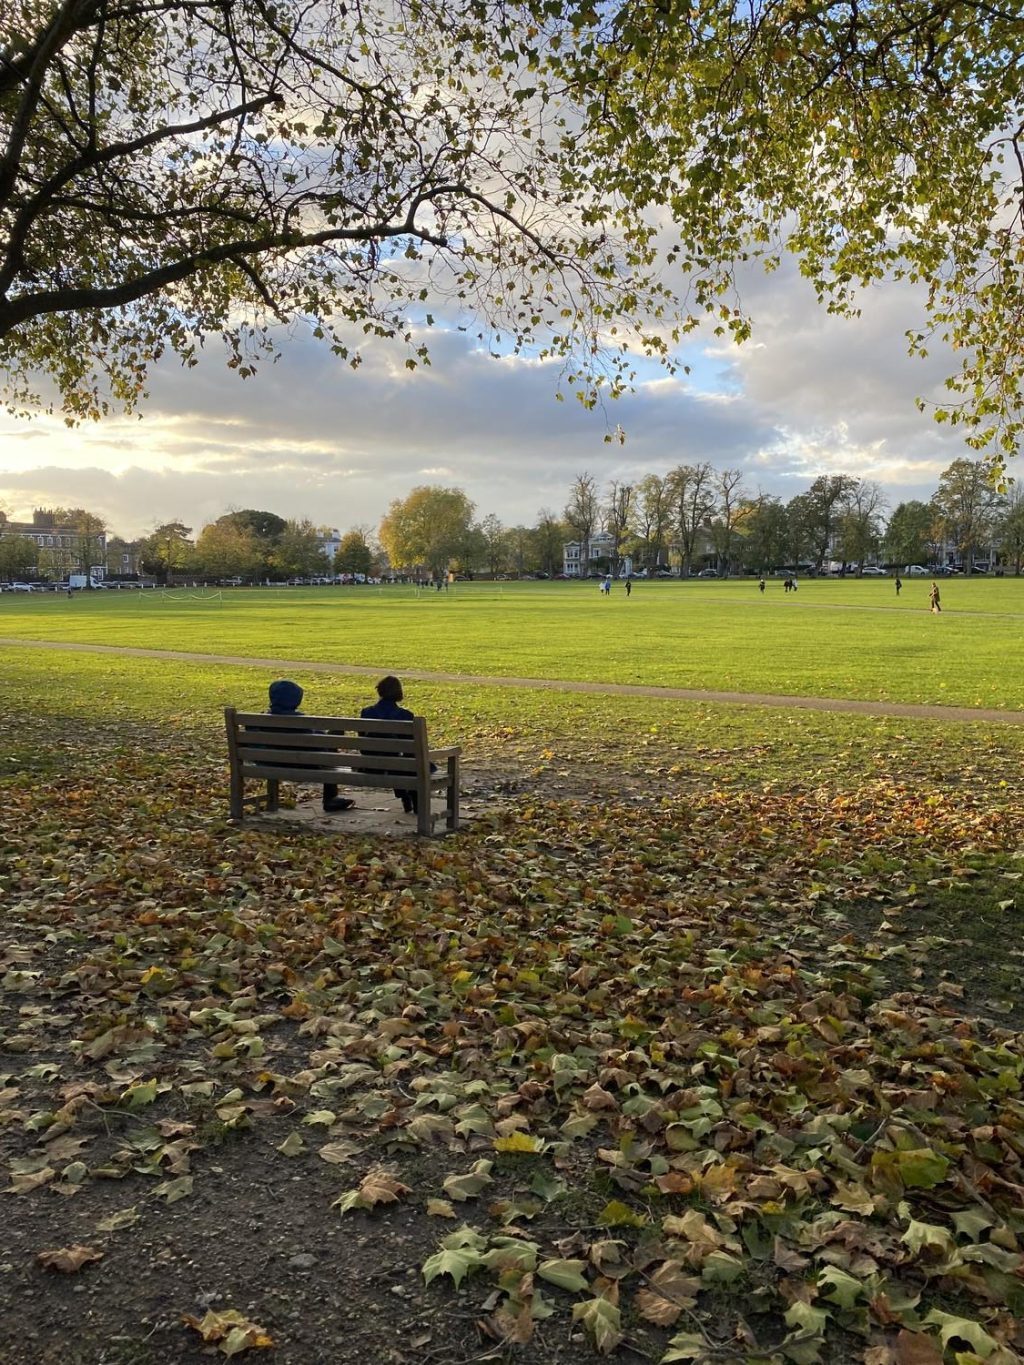 Lyndsee Moran took this photo of the park that the show centers around when she made her visit to Richmond in November 2022. She said it made her tear up seeing how true these scenes are in real life. Photo courtesy of Lyndsee Moran